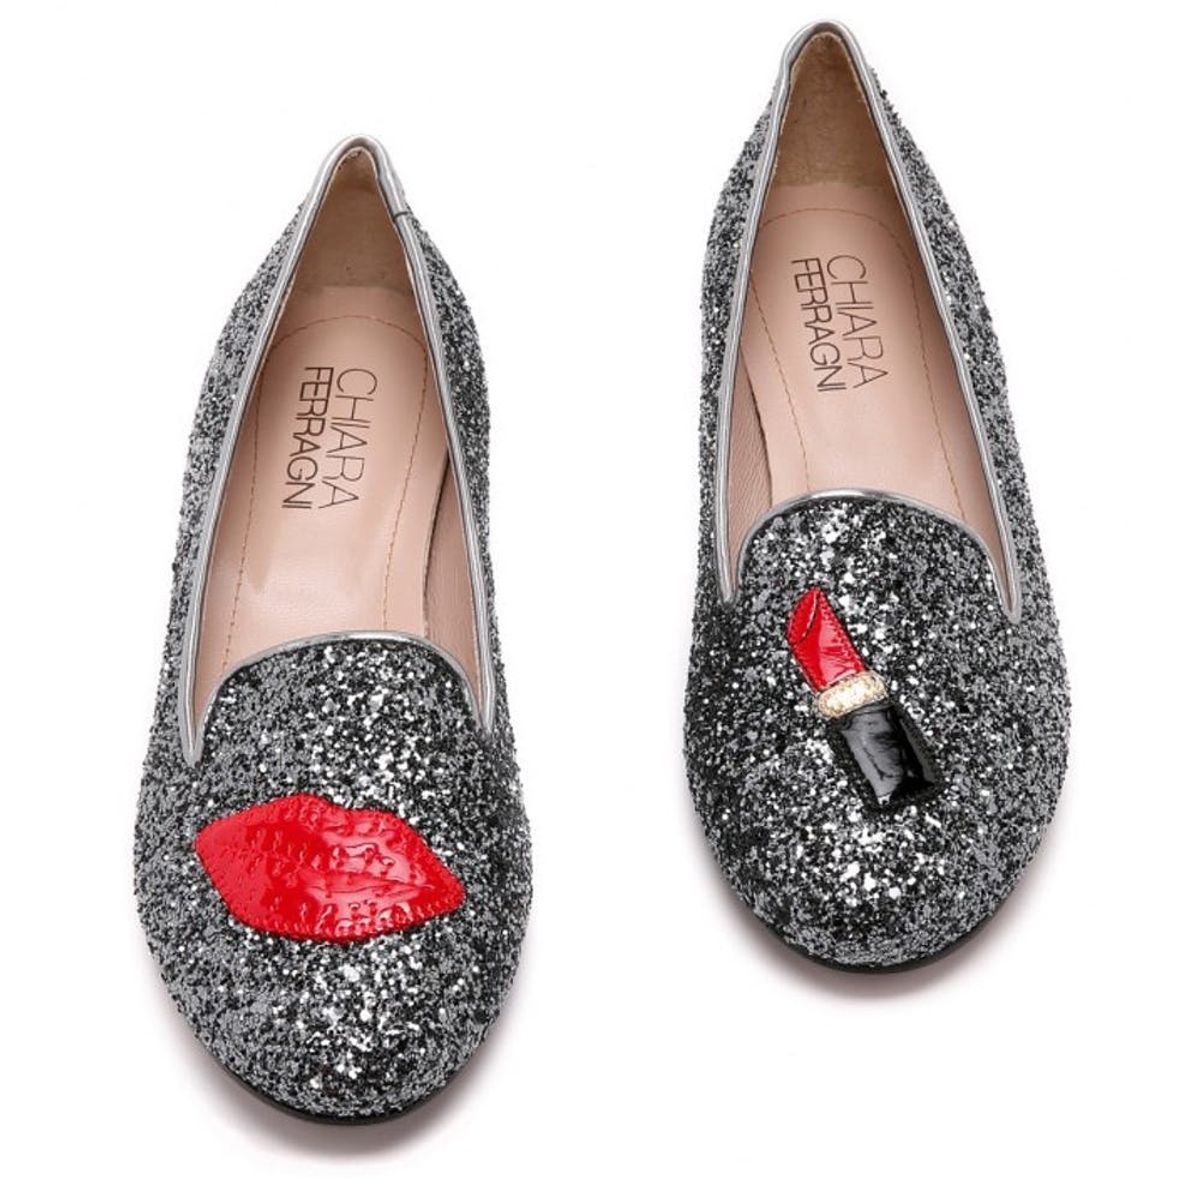 15 Valentine’s Day-Approved Flats That Are WAY Cuter Than Heels